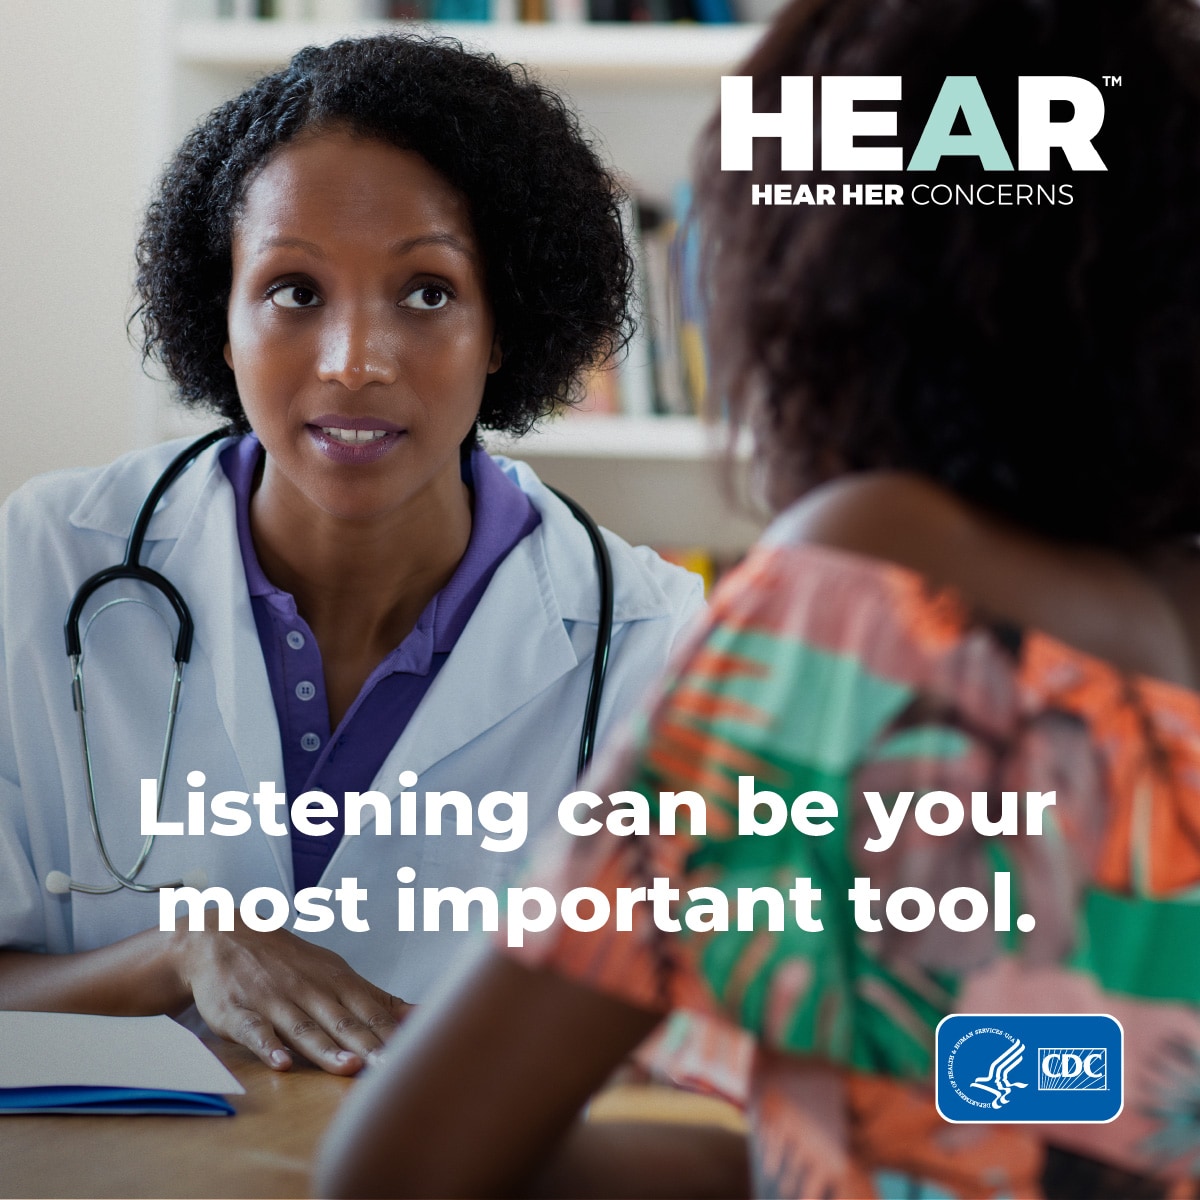 Hear Her Concerns. Listening can be your most important tool.